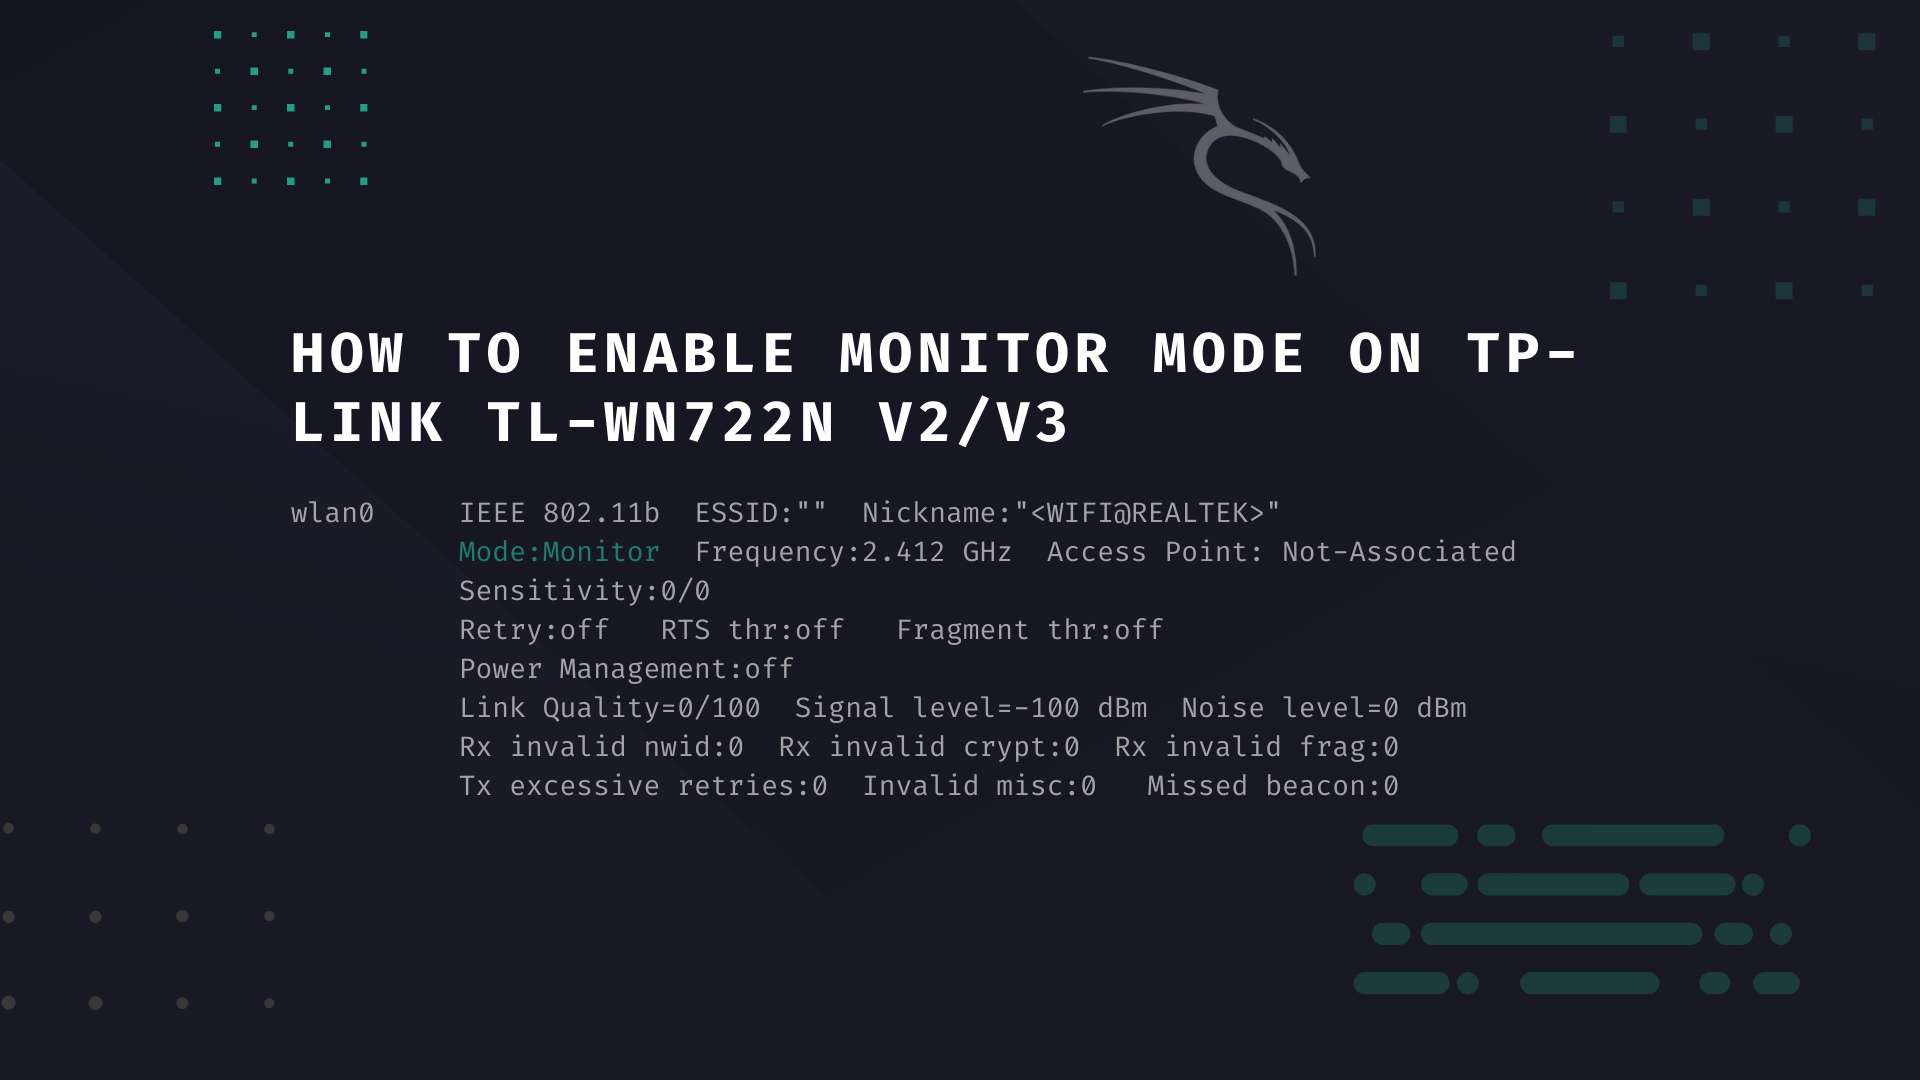 How to on NoobLinux - Mode V2/V3 Monitor TL-WN722N TP-LINK Enable